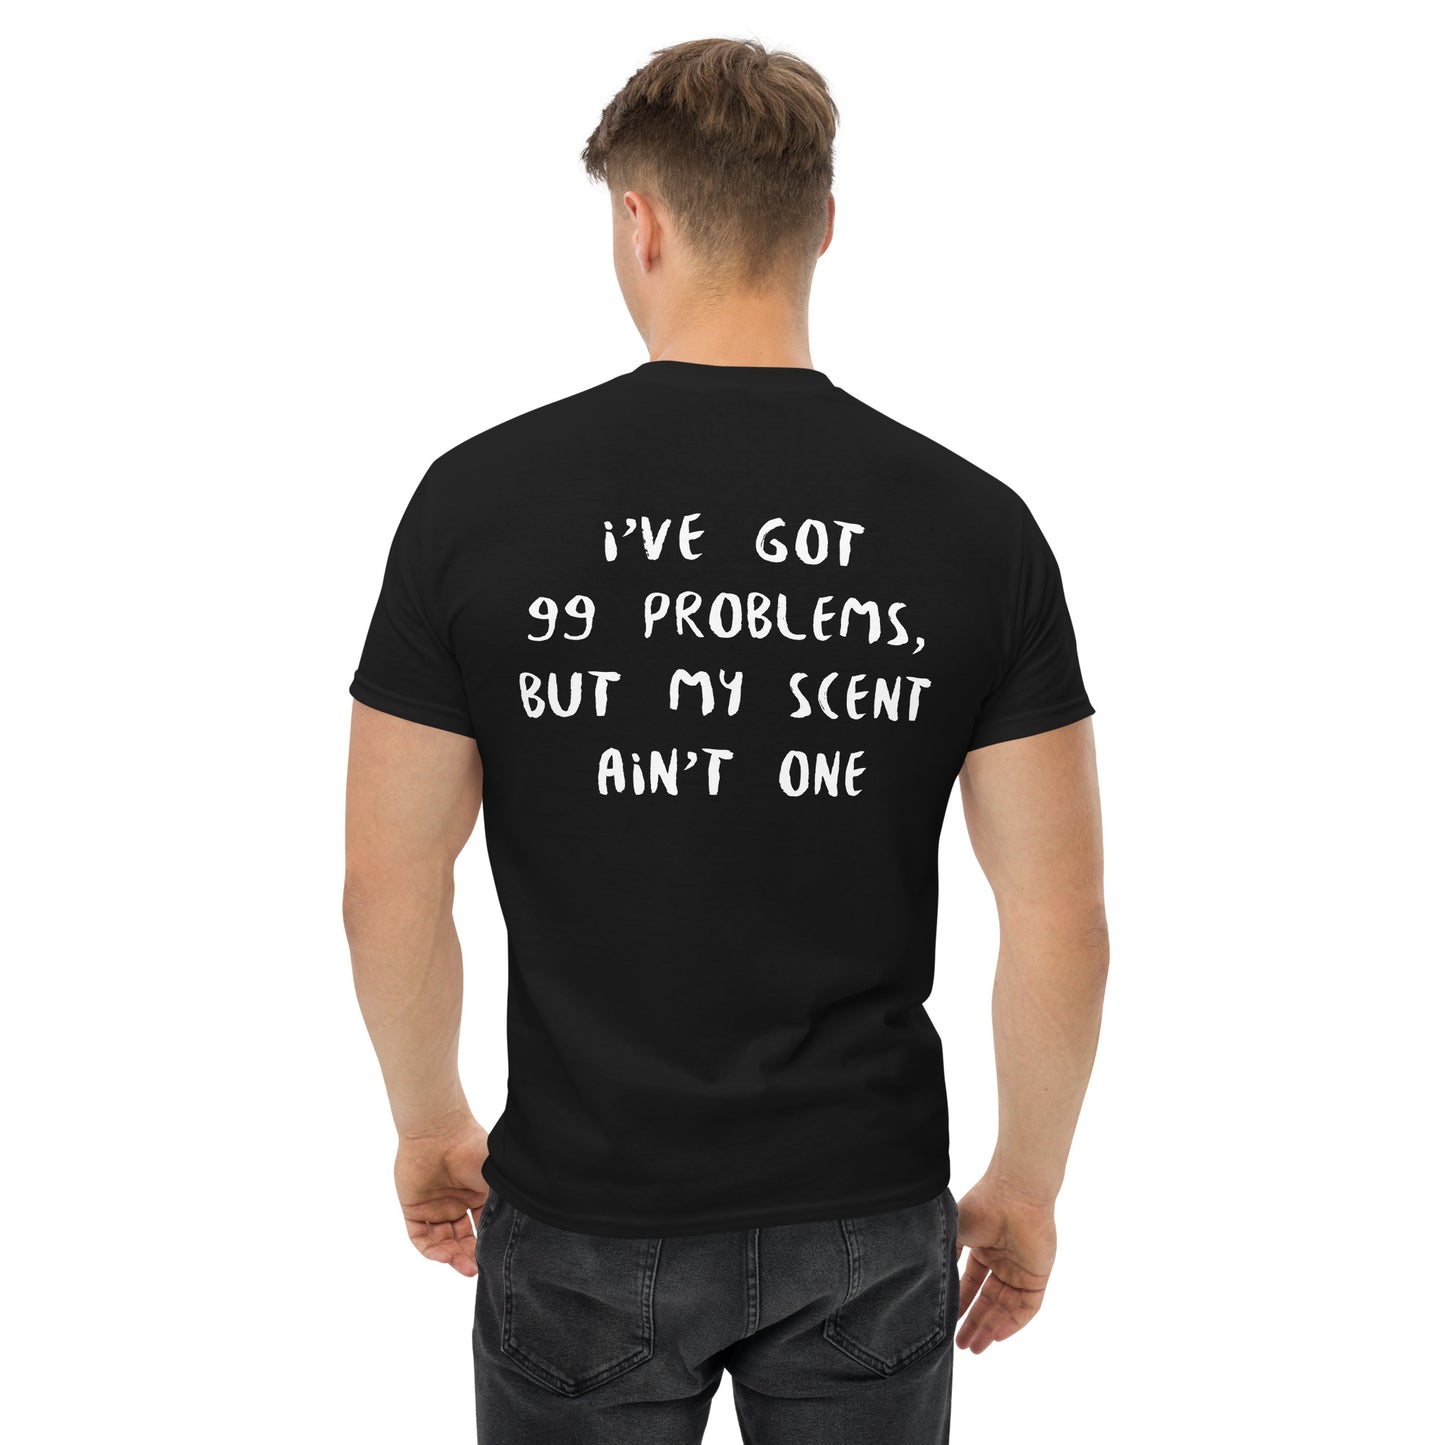 I've Got 99 Problems, but My Scent Ain't One - Shirt